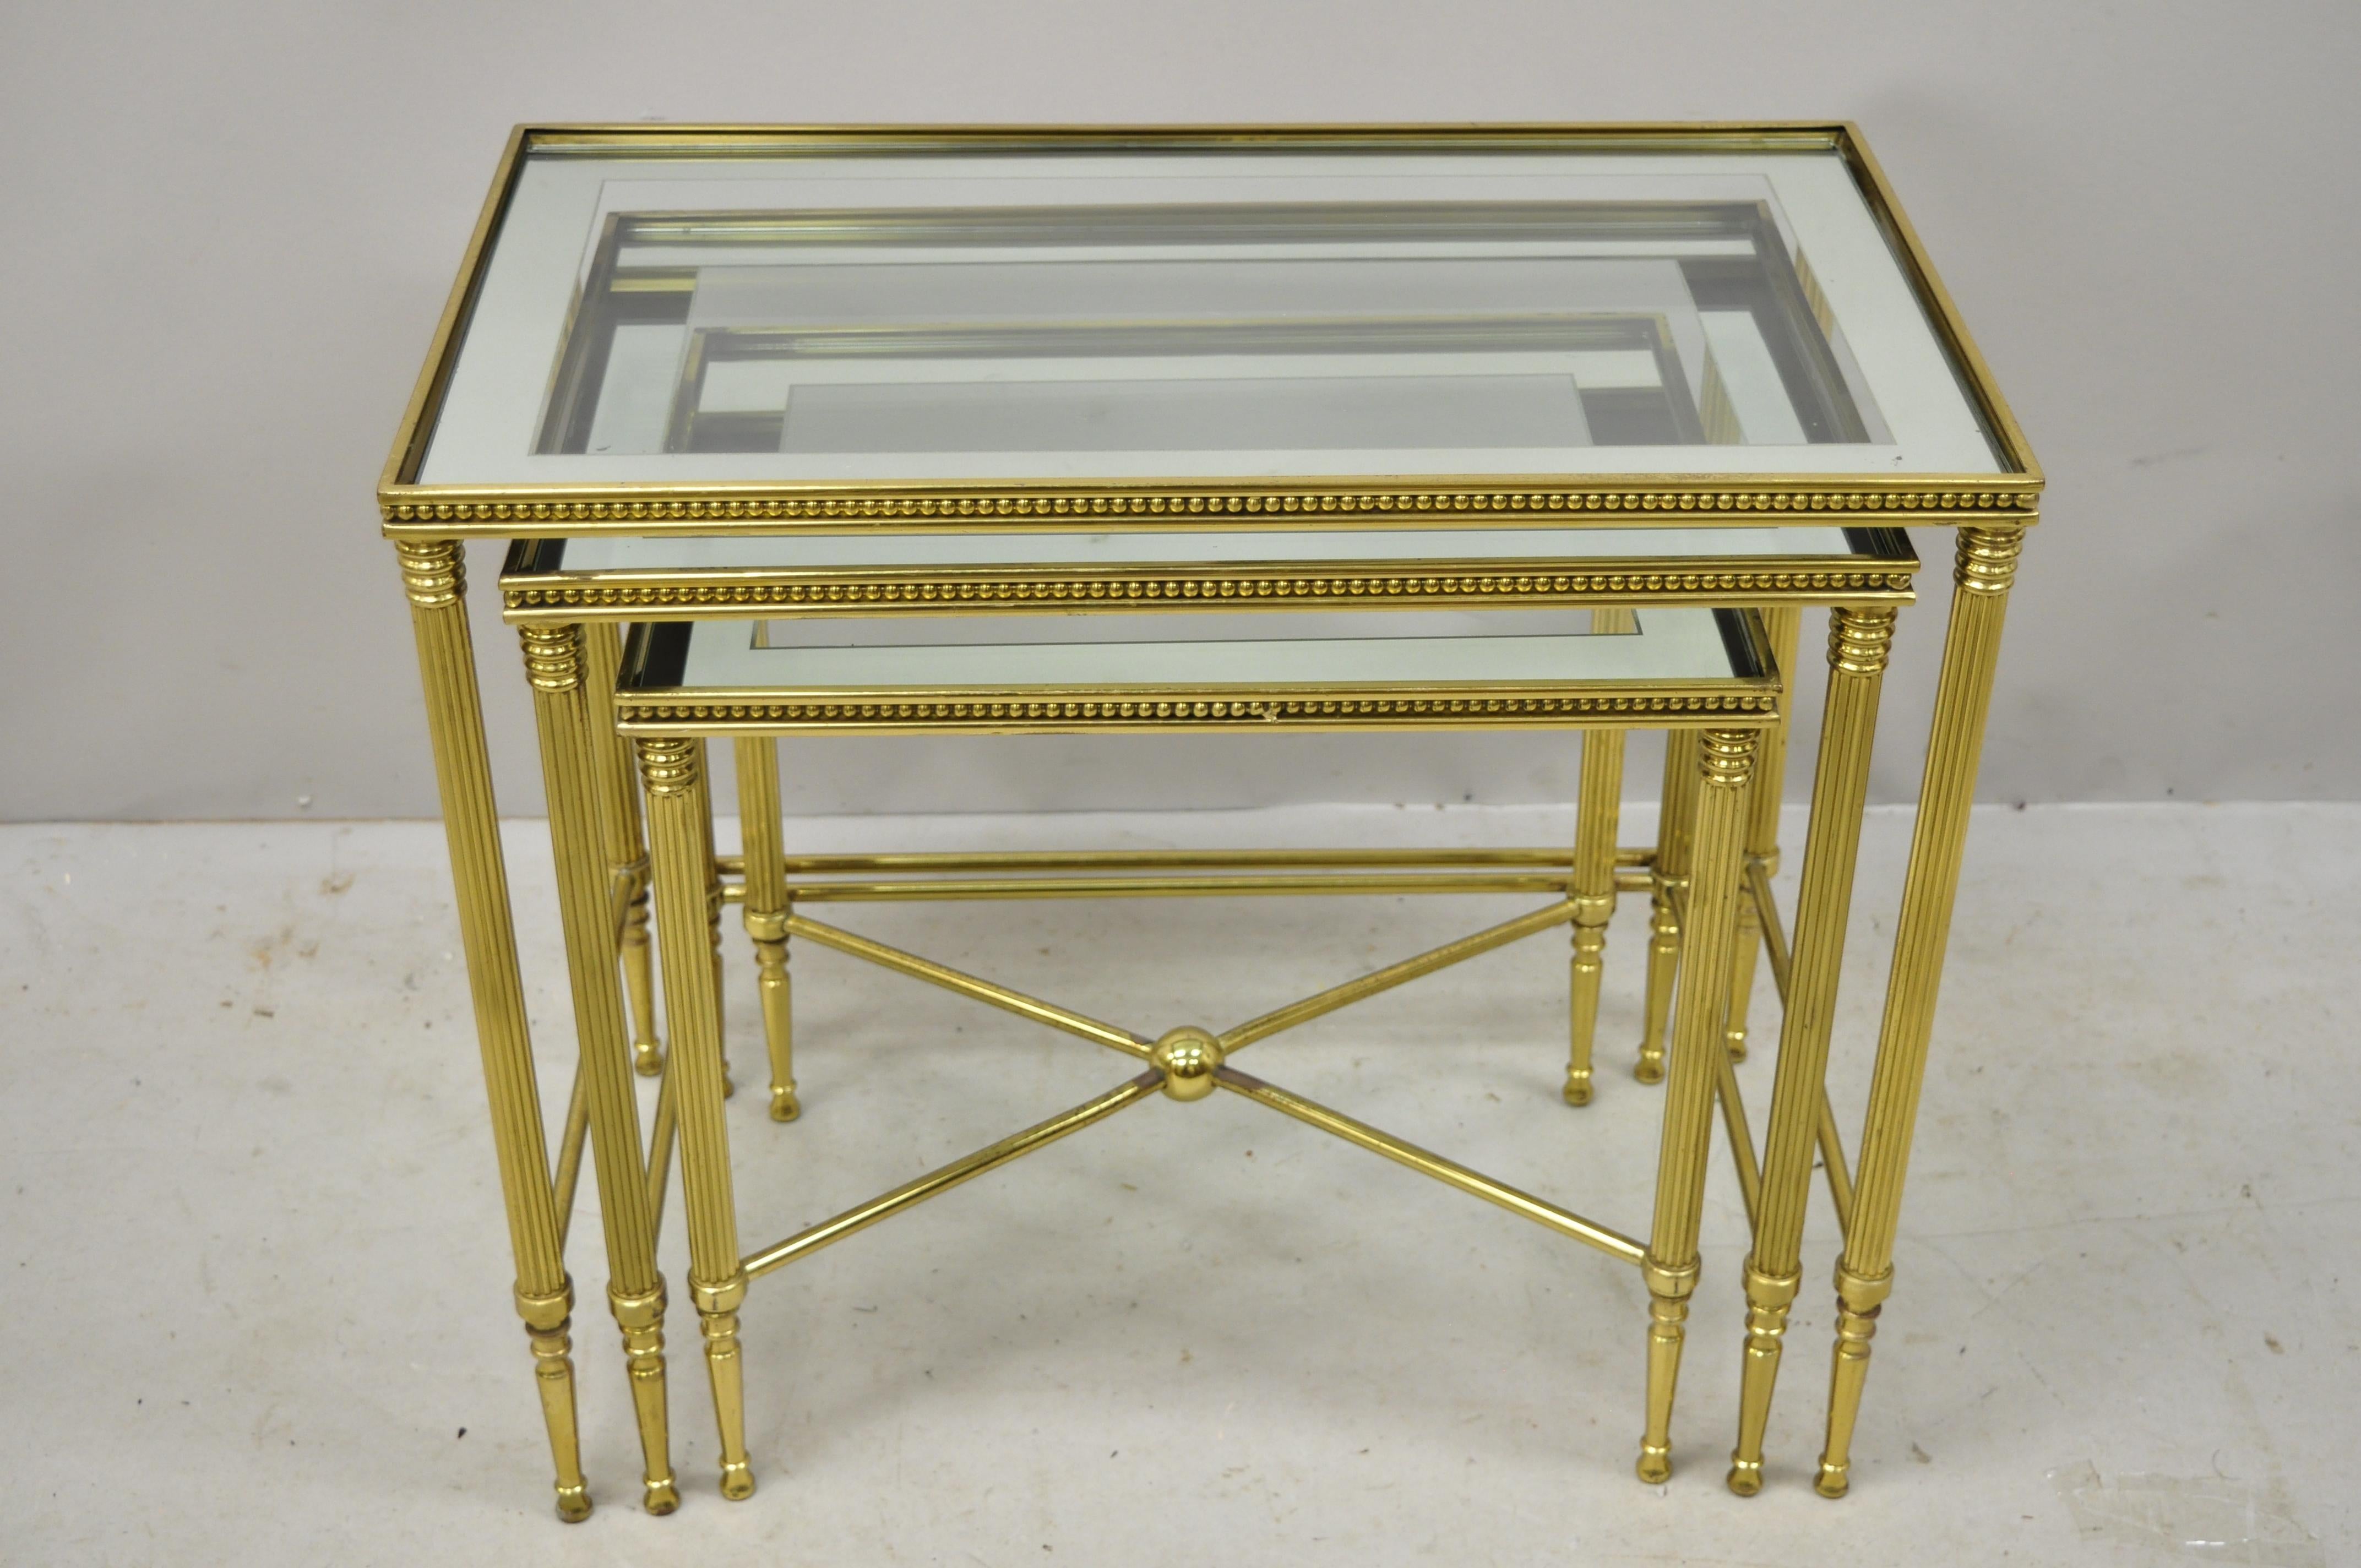 3 brass Italian glass top Hollywood Regency side nesting tables with tapered legs. Set features glass tops with mirror borders, brass beaded trim, ball form stretcher, brass construction, sleek tapered legs, quality Italian craftsmanship, circa